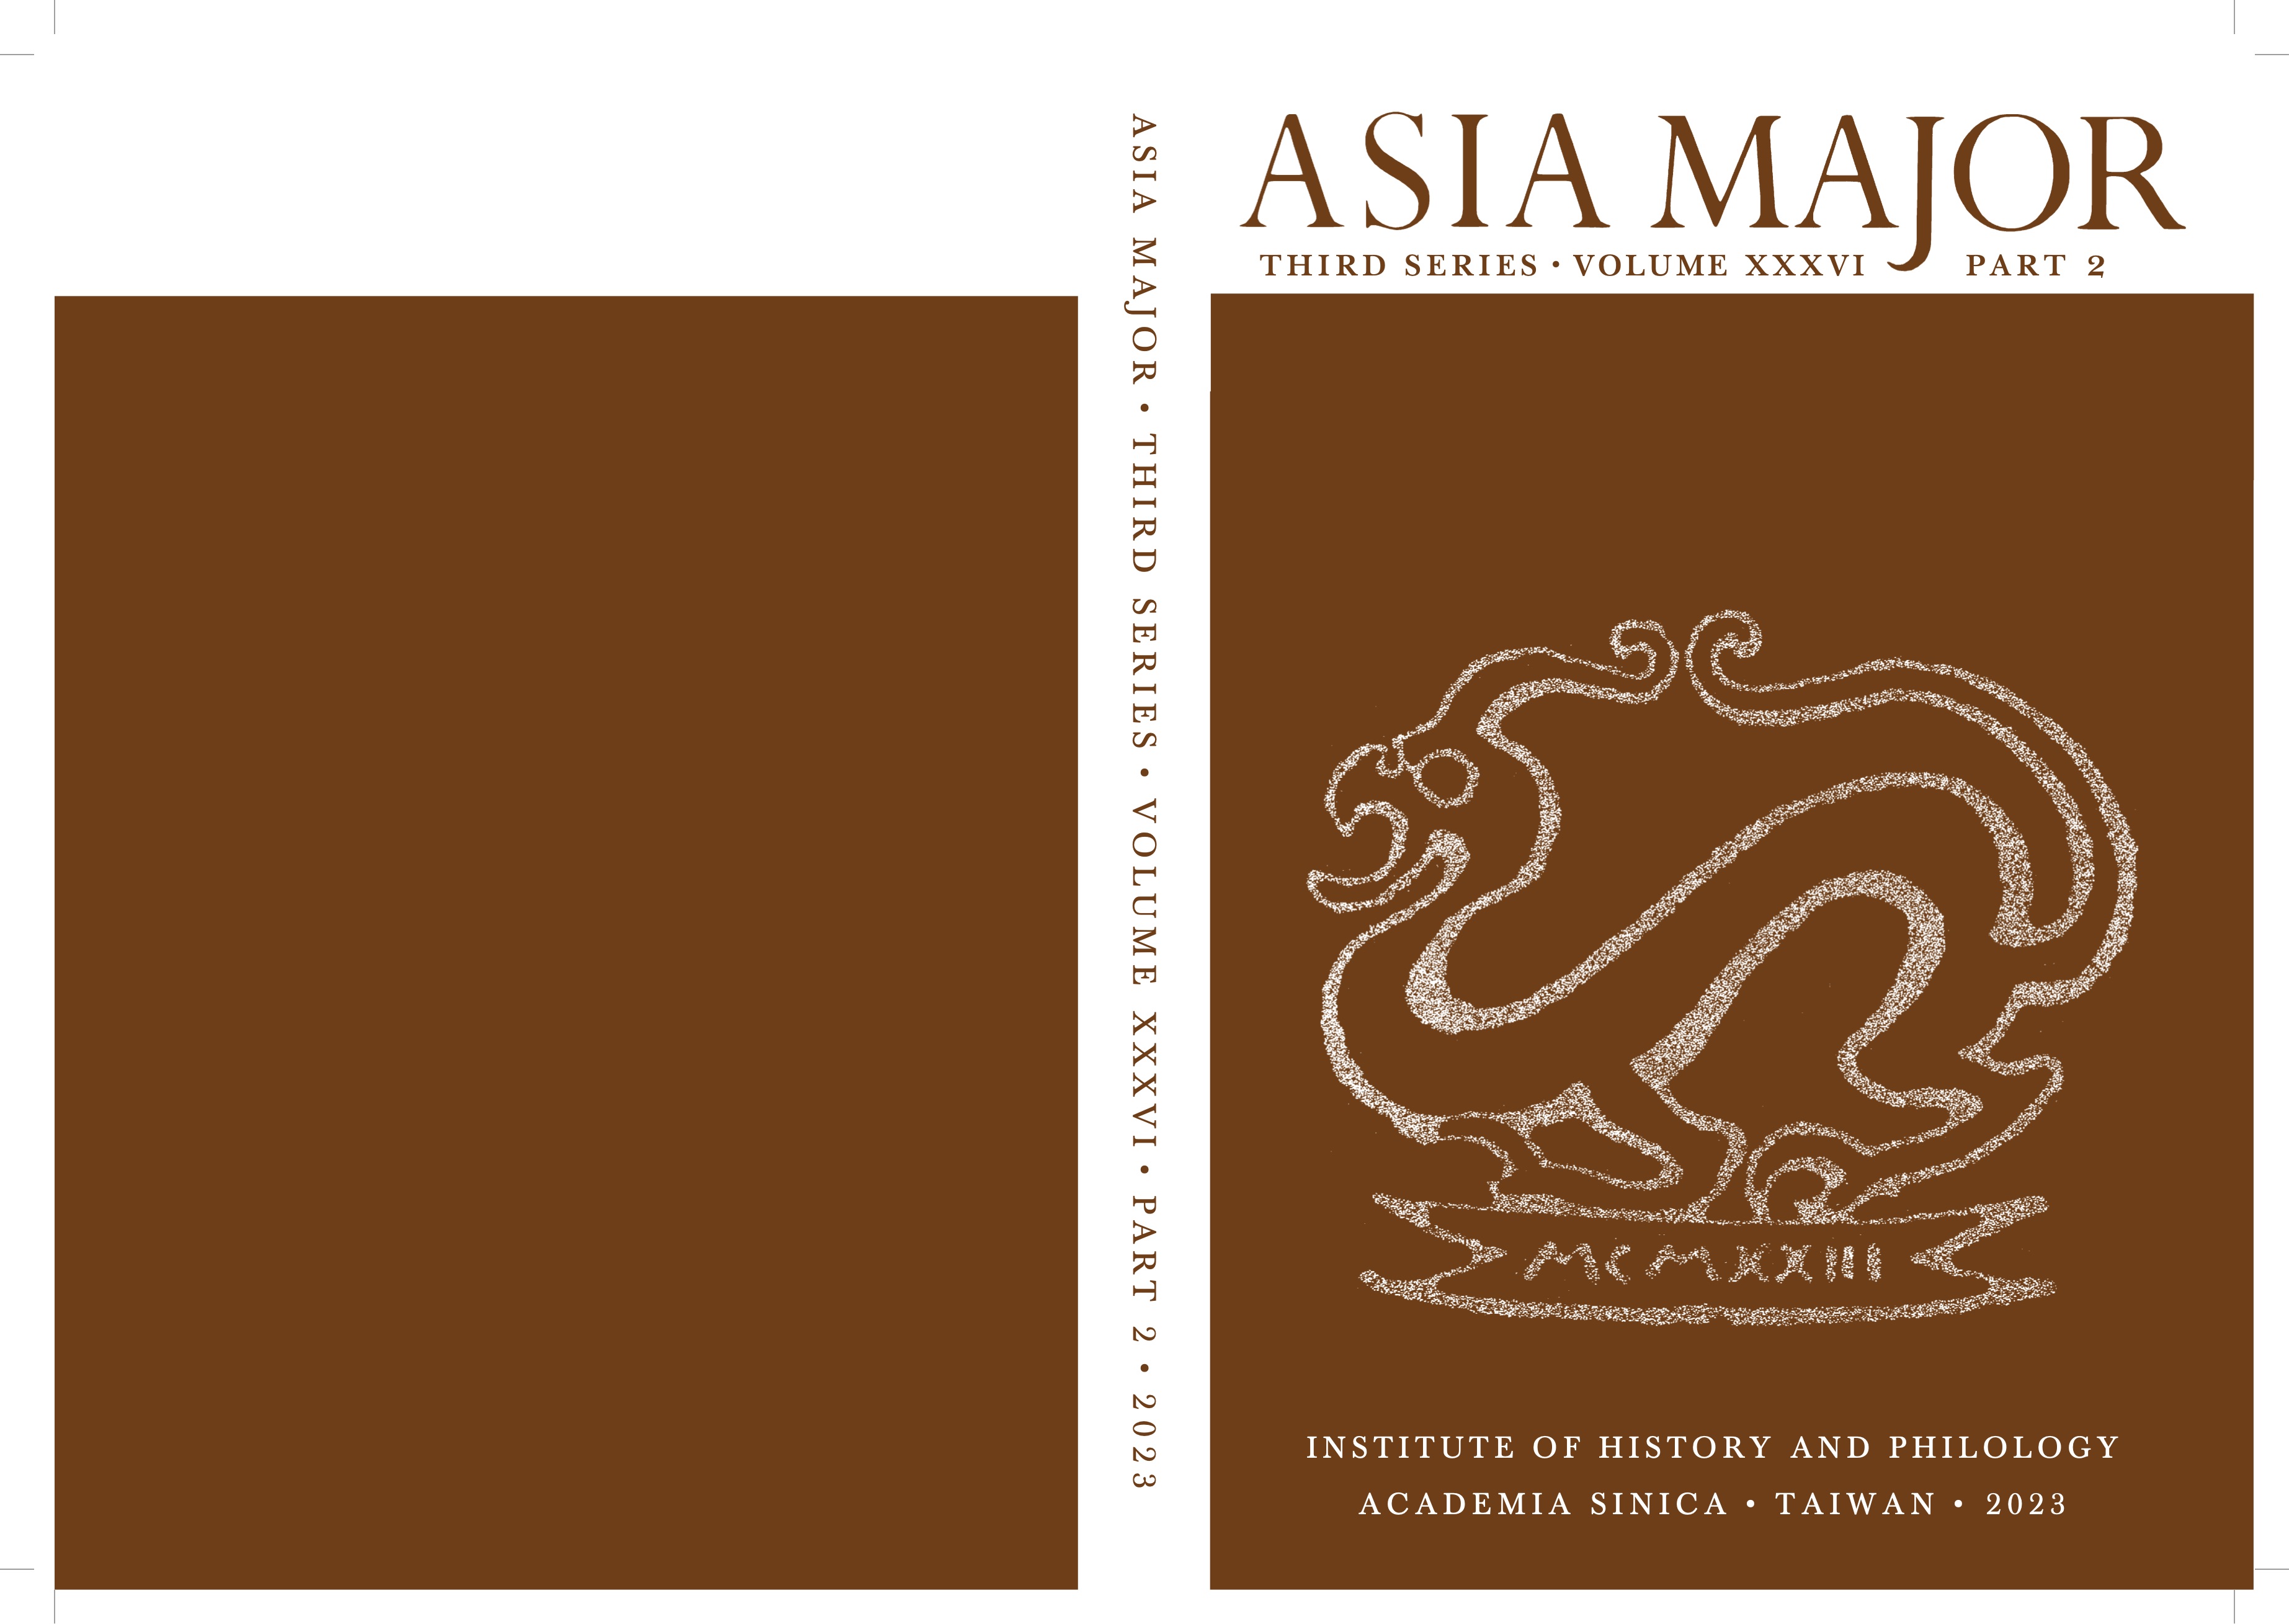 Asia Major, Volume 36 Part 2 is now available online